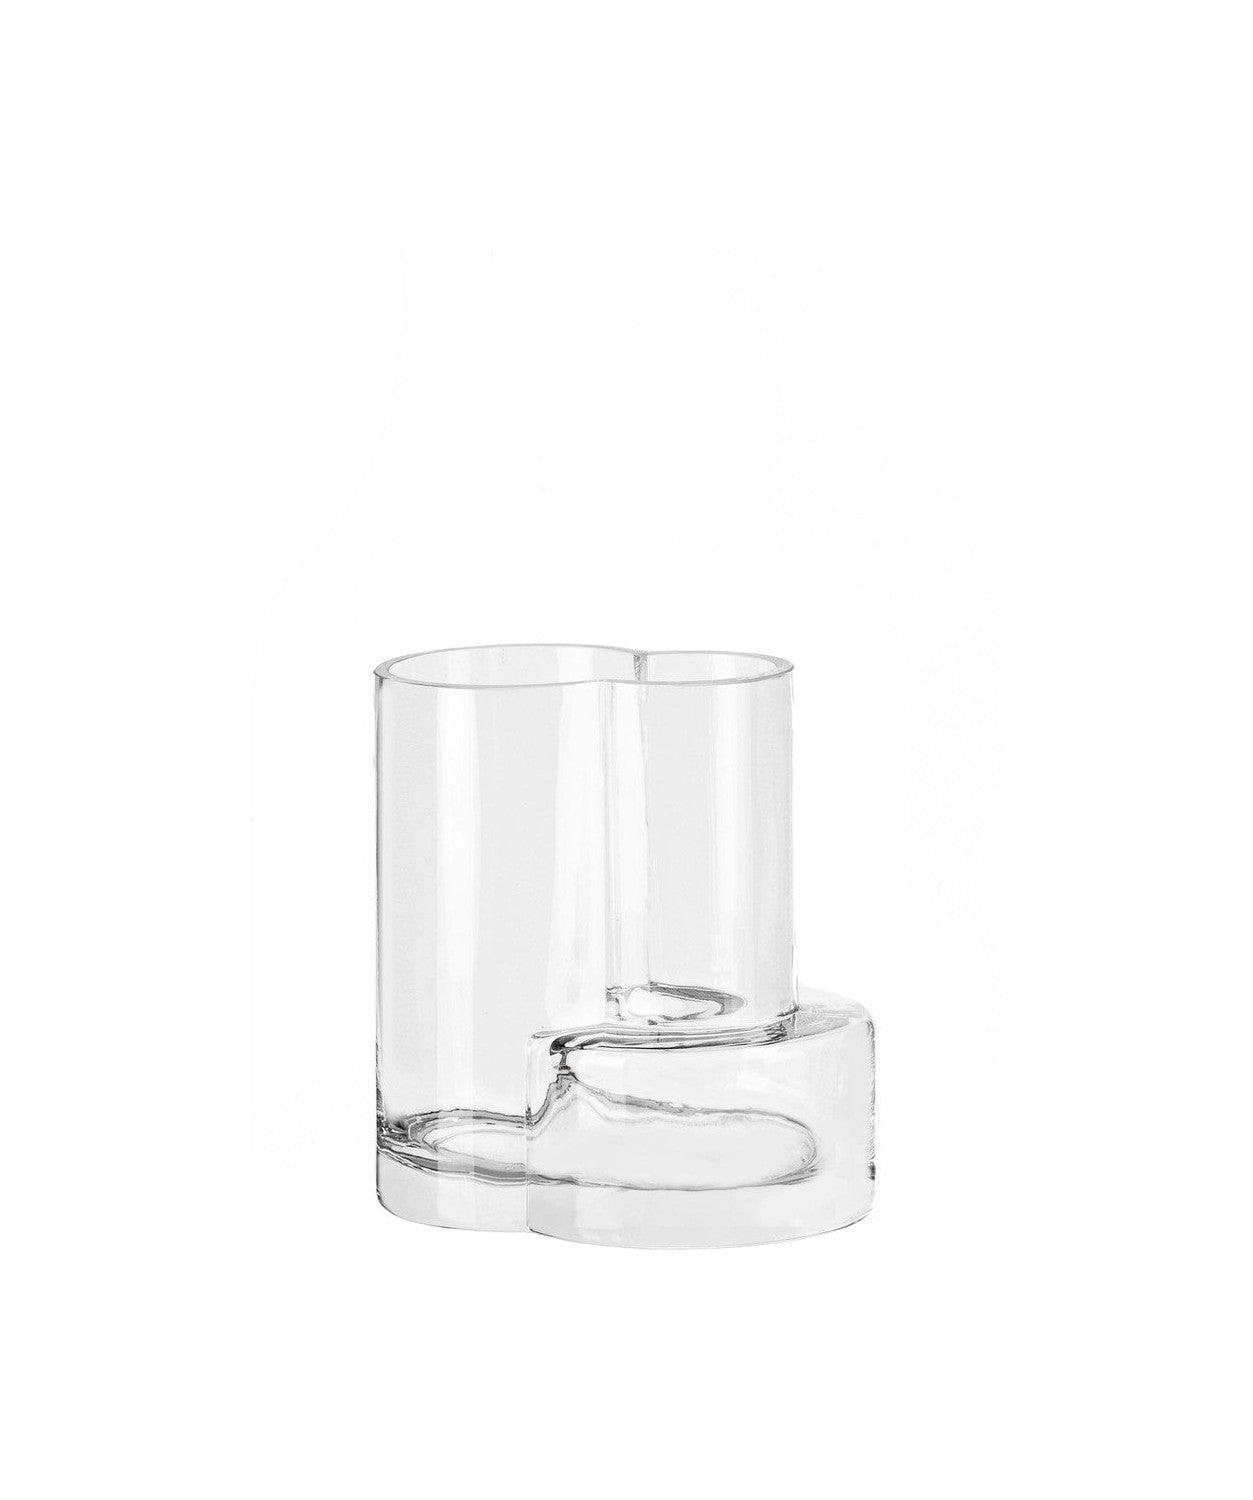 Glass vase of top innovtive design with constructivist touch, FUSIO 20